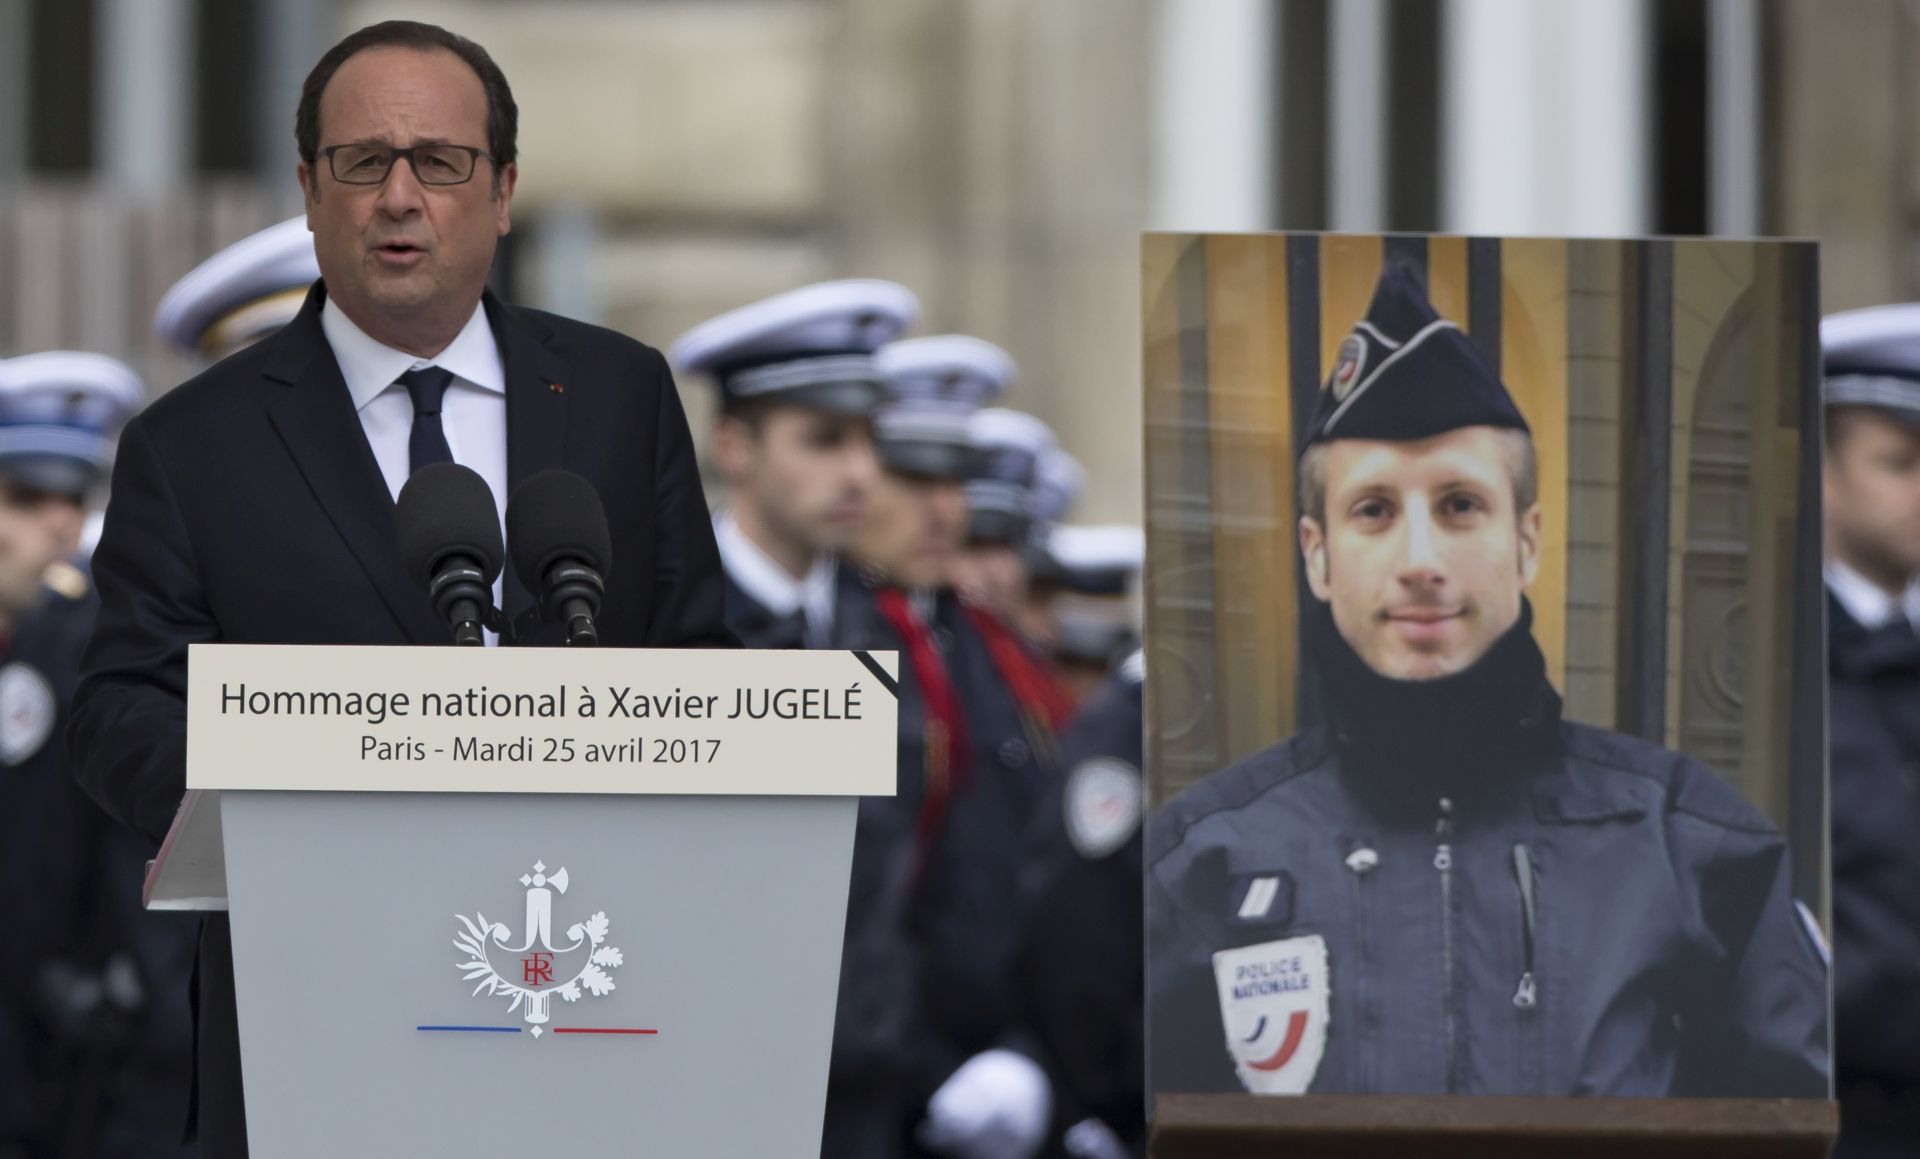 epa05926602 French President Francois Hollande delivers a speech during a ceremony for slain police officer Xavier Jugele, at the Paris police headquarters in Paris, France, 25 April 2017. Jugele was killed by a gunman during the 20 April Champs Elysees terror attack shooting.  EPA/IAN LANGSDON